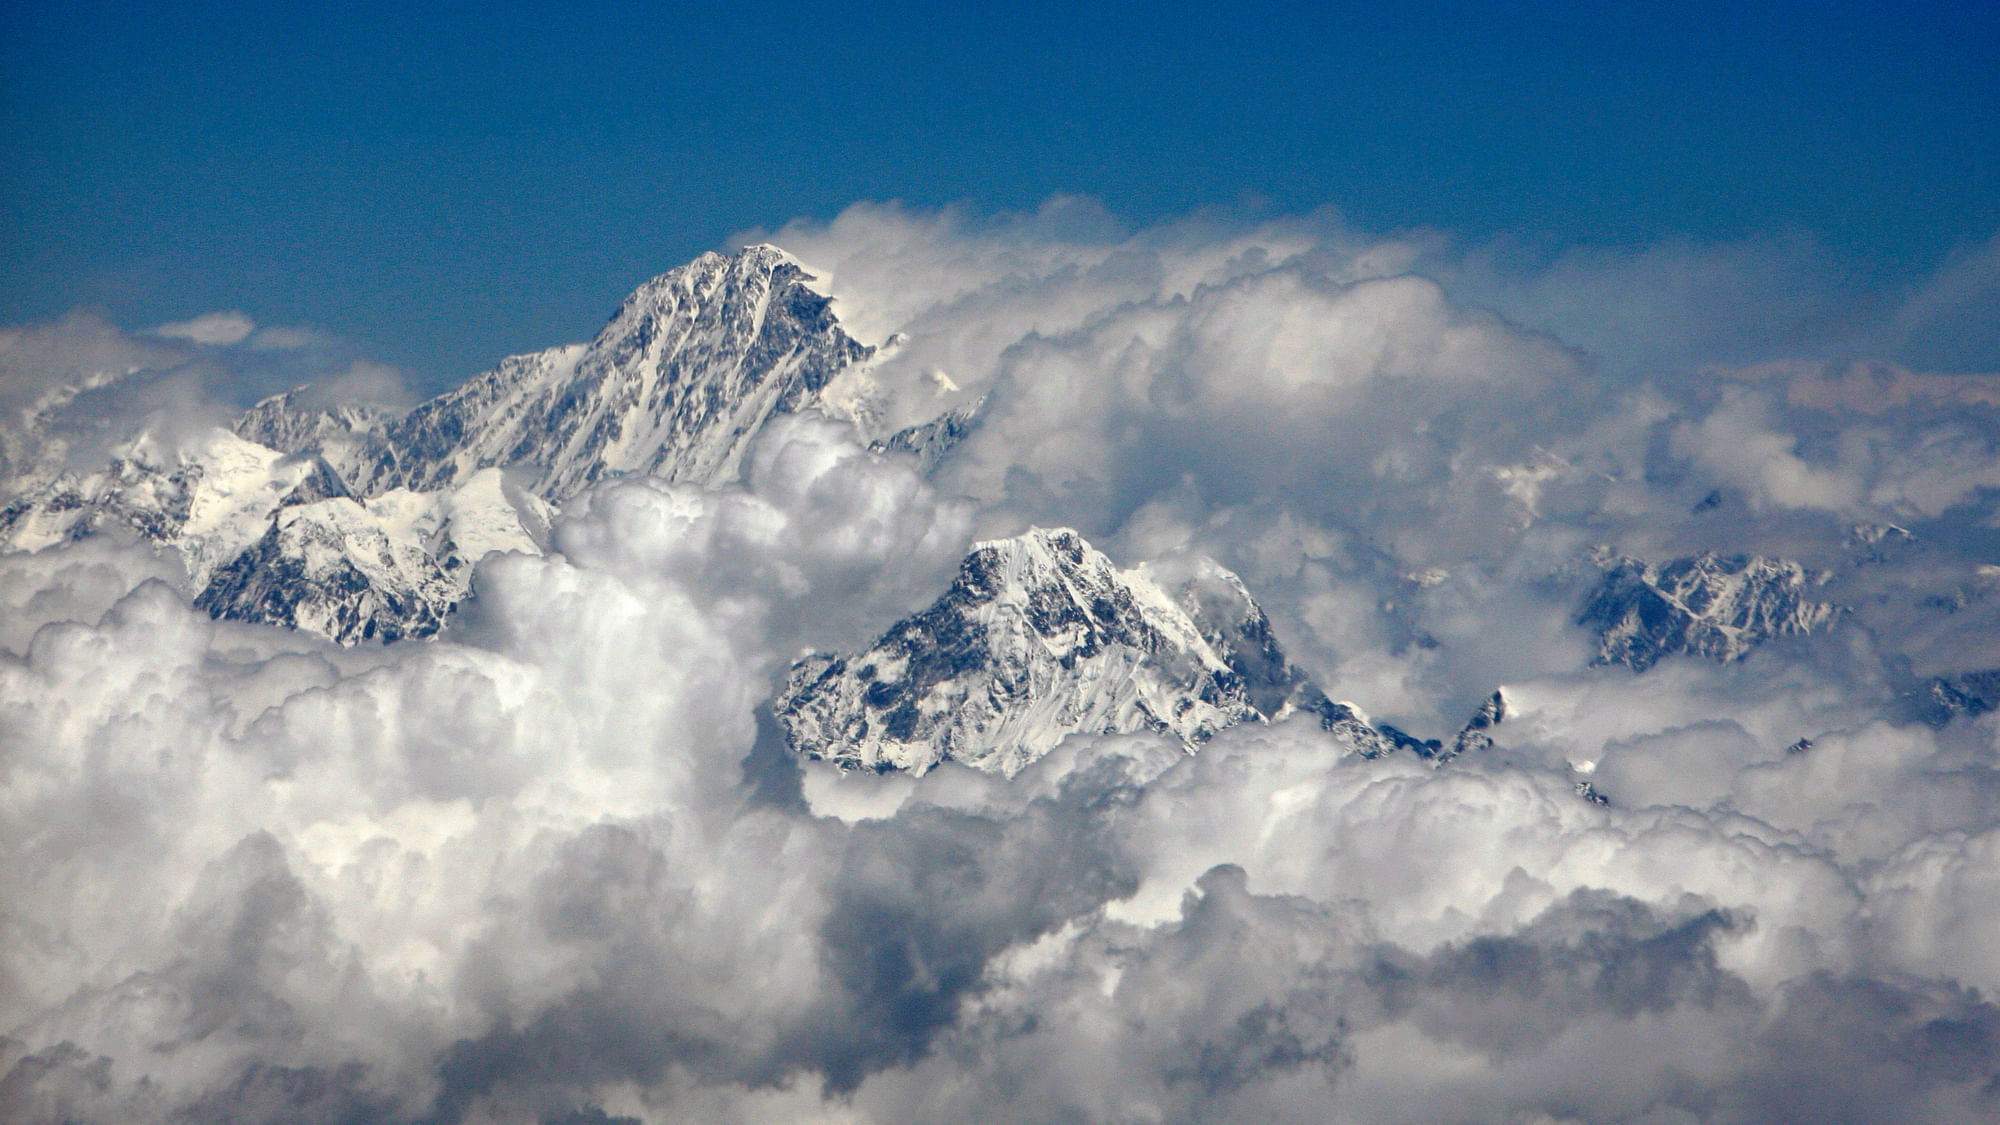 Mount Everest, the highest peak in the world, with an altitude of 8.848 metres (29.028 ft) is seen in this aerial view next to 6.812 metres (22.349 feet) high Mount Ama Dablam (bottom right).&nbsp;